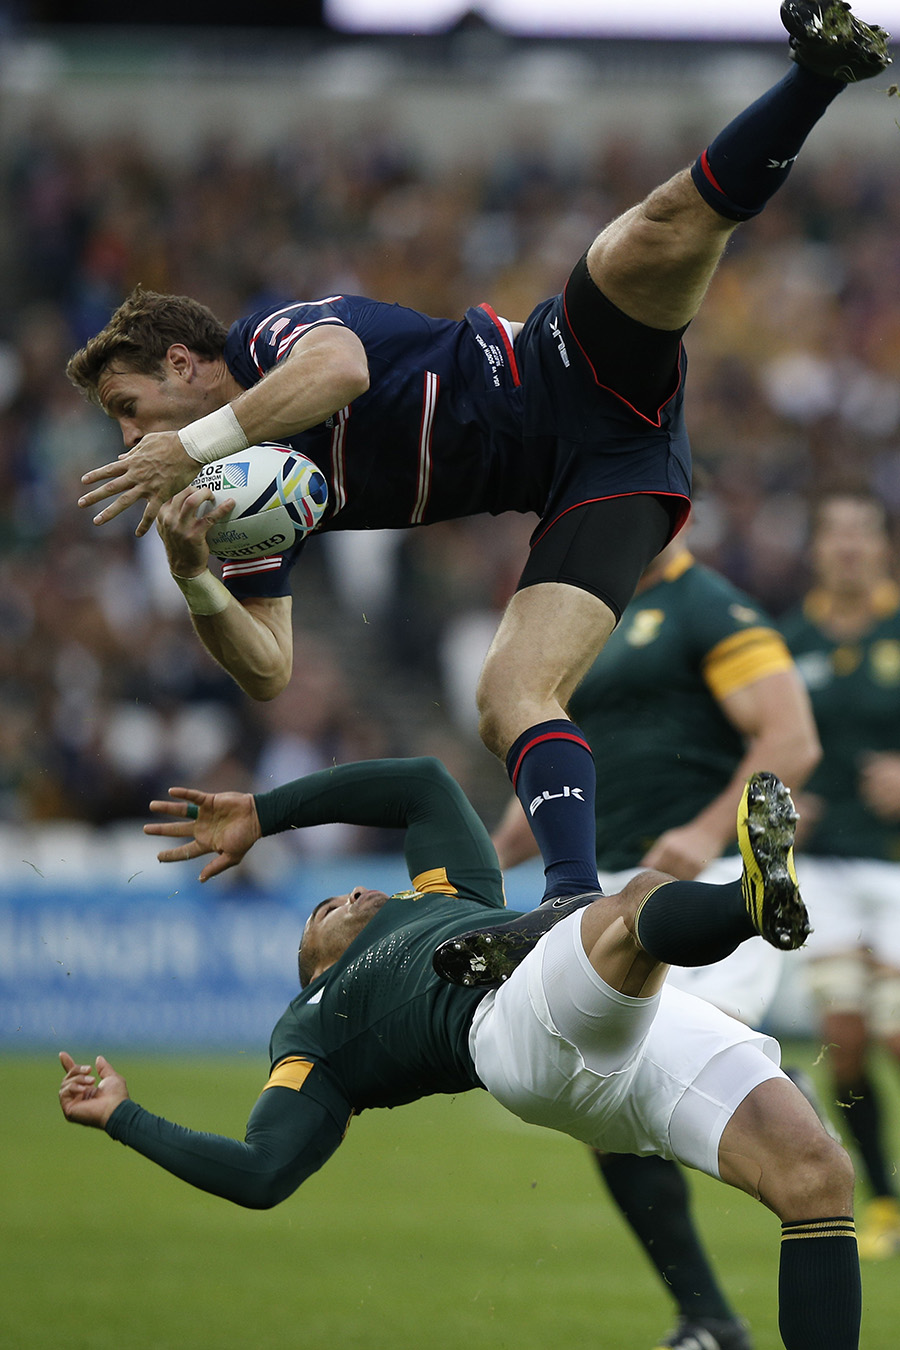 Bryan Habana of South Africa collides with Blaine Scully of the United States